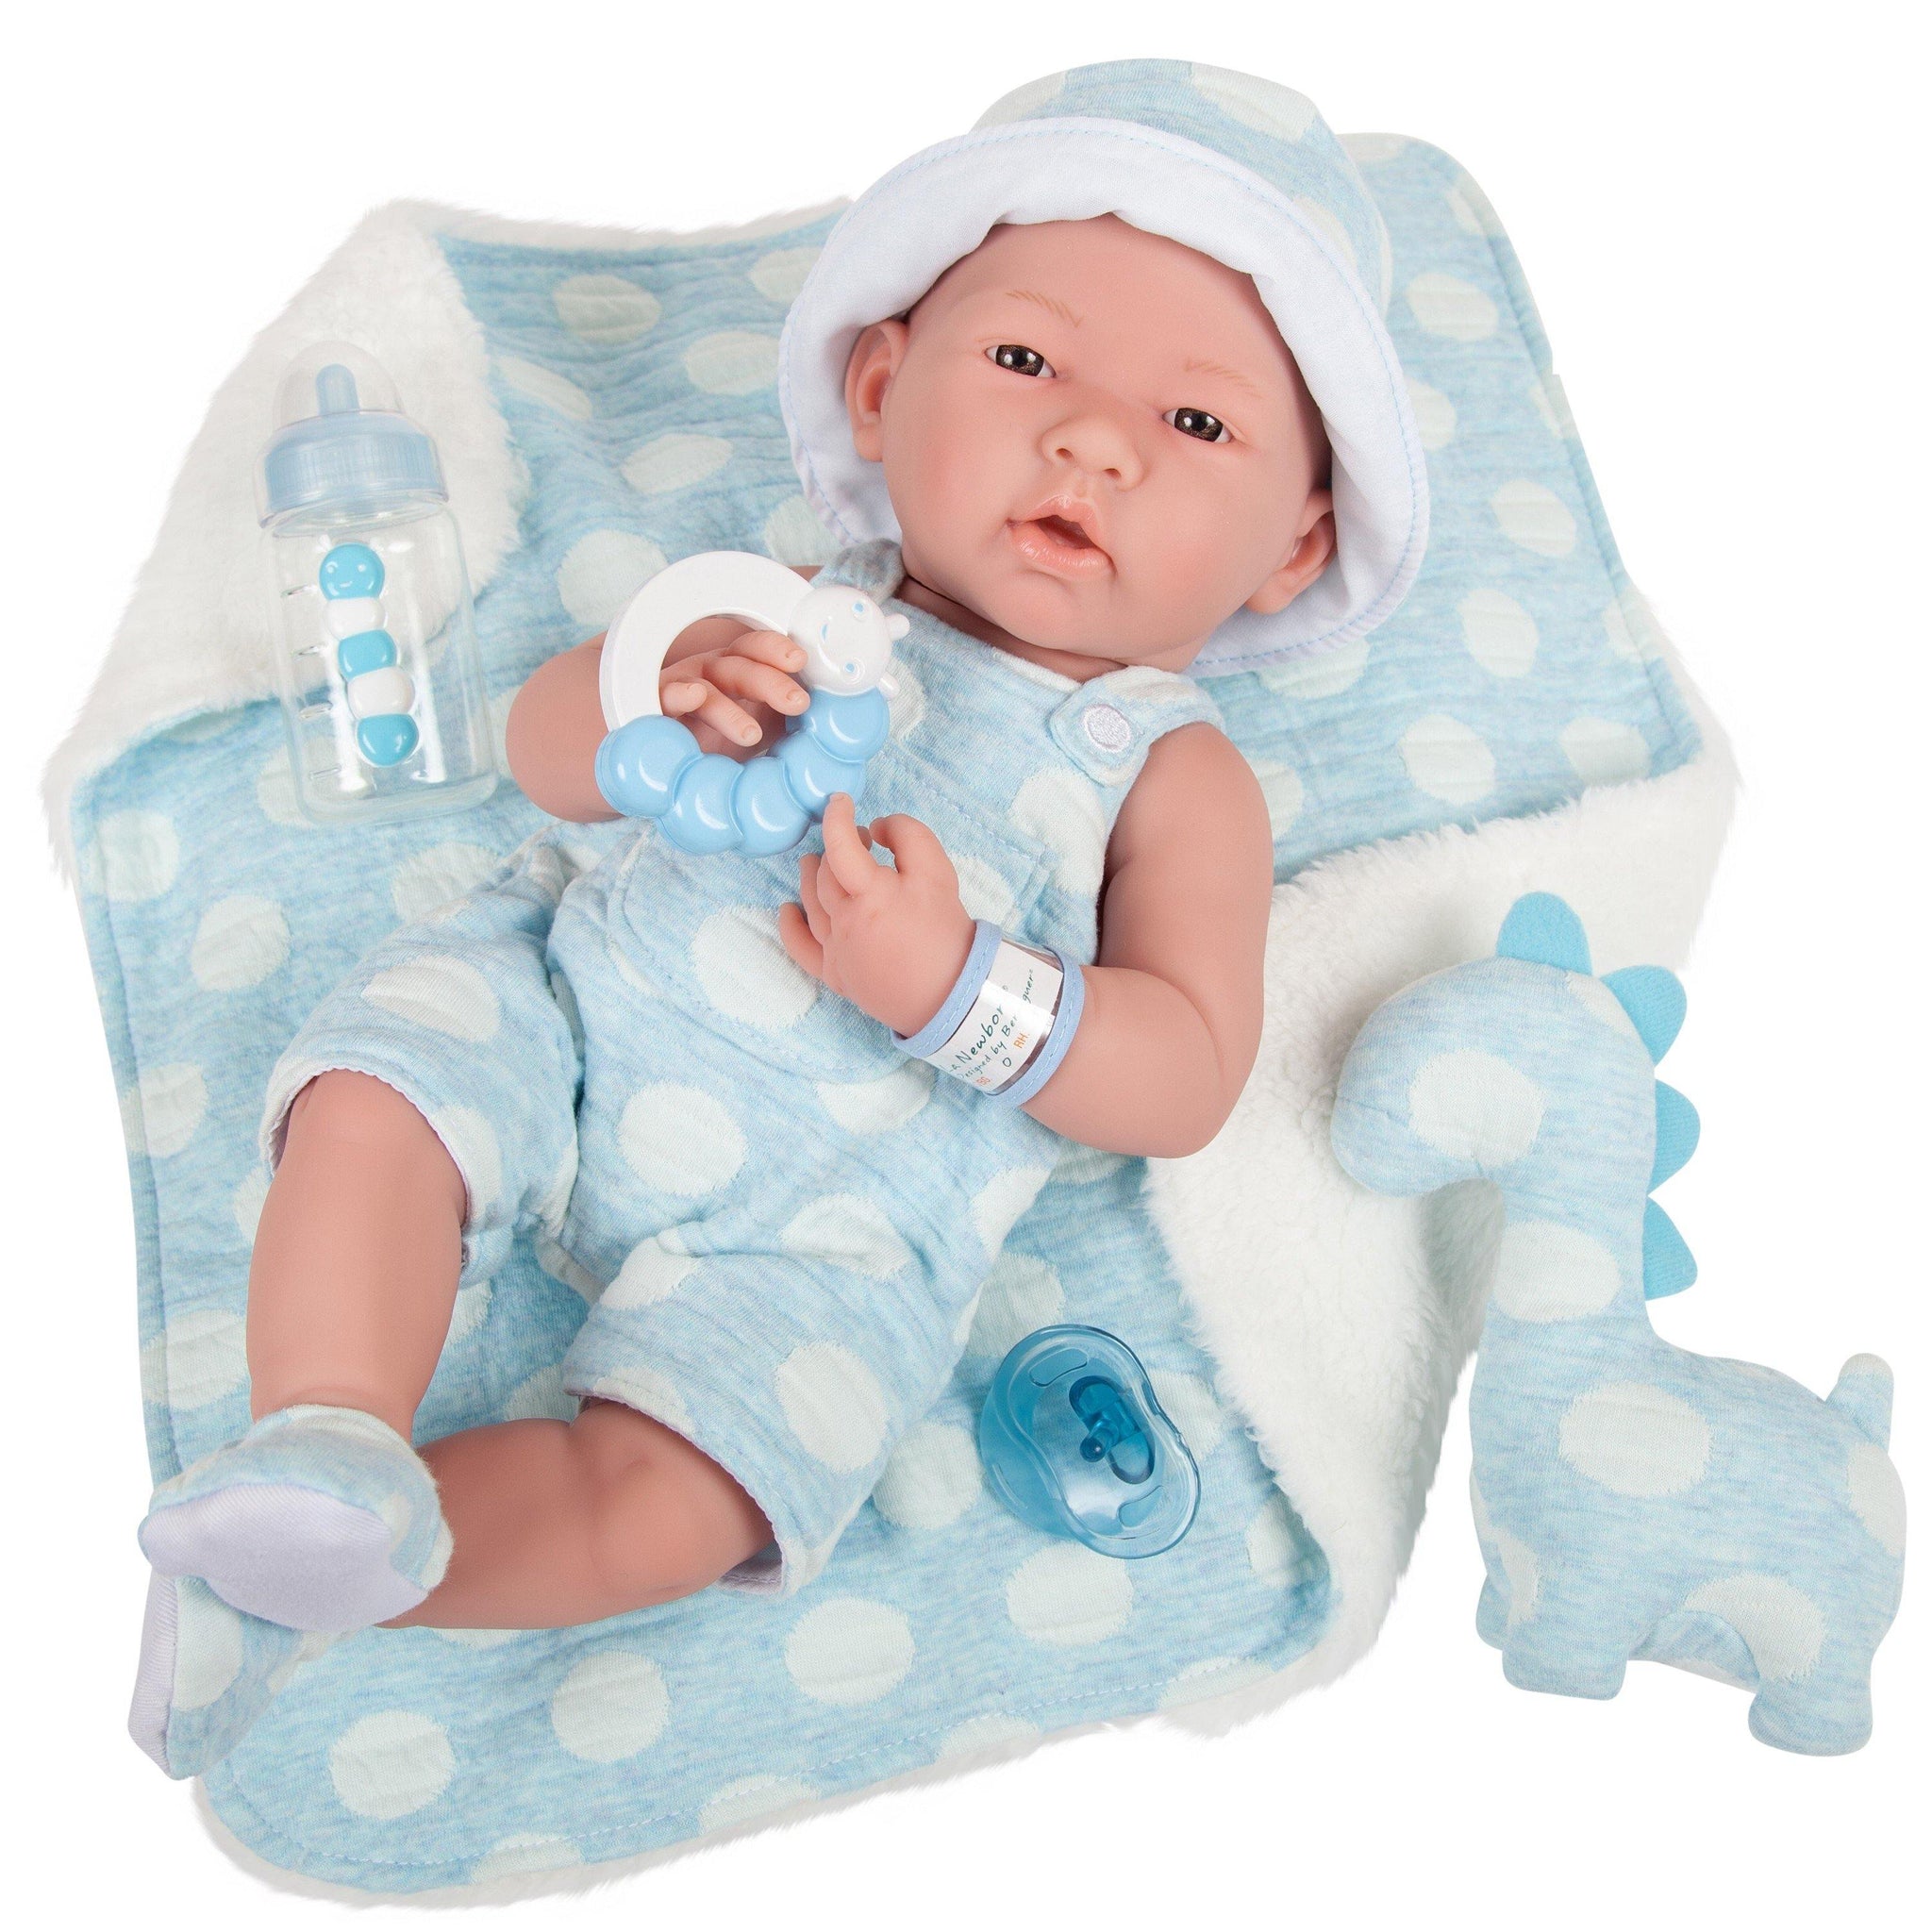 JC Toys, La Newborn AllVinyl Real Boy 15 in Baby Doll-Blue with White Polka Dots - JC Toys Group Inc.